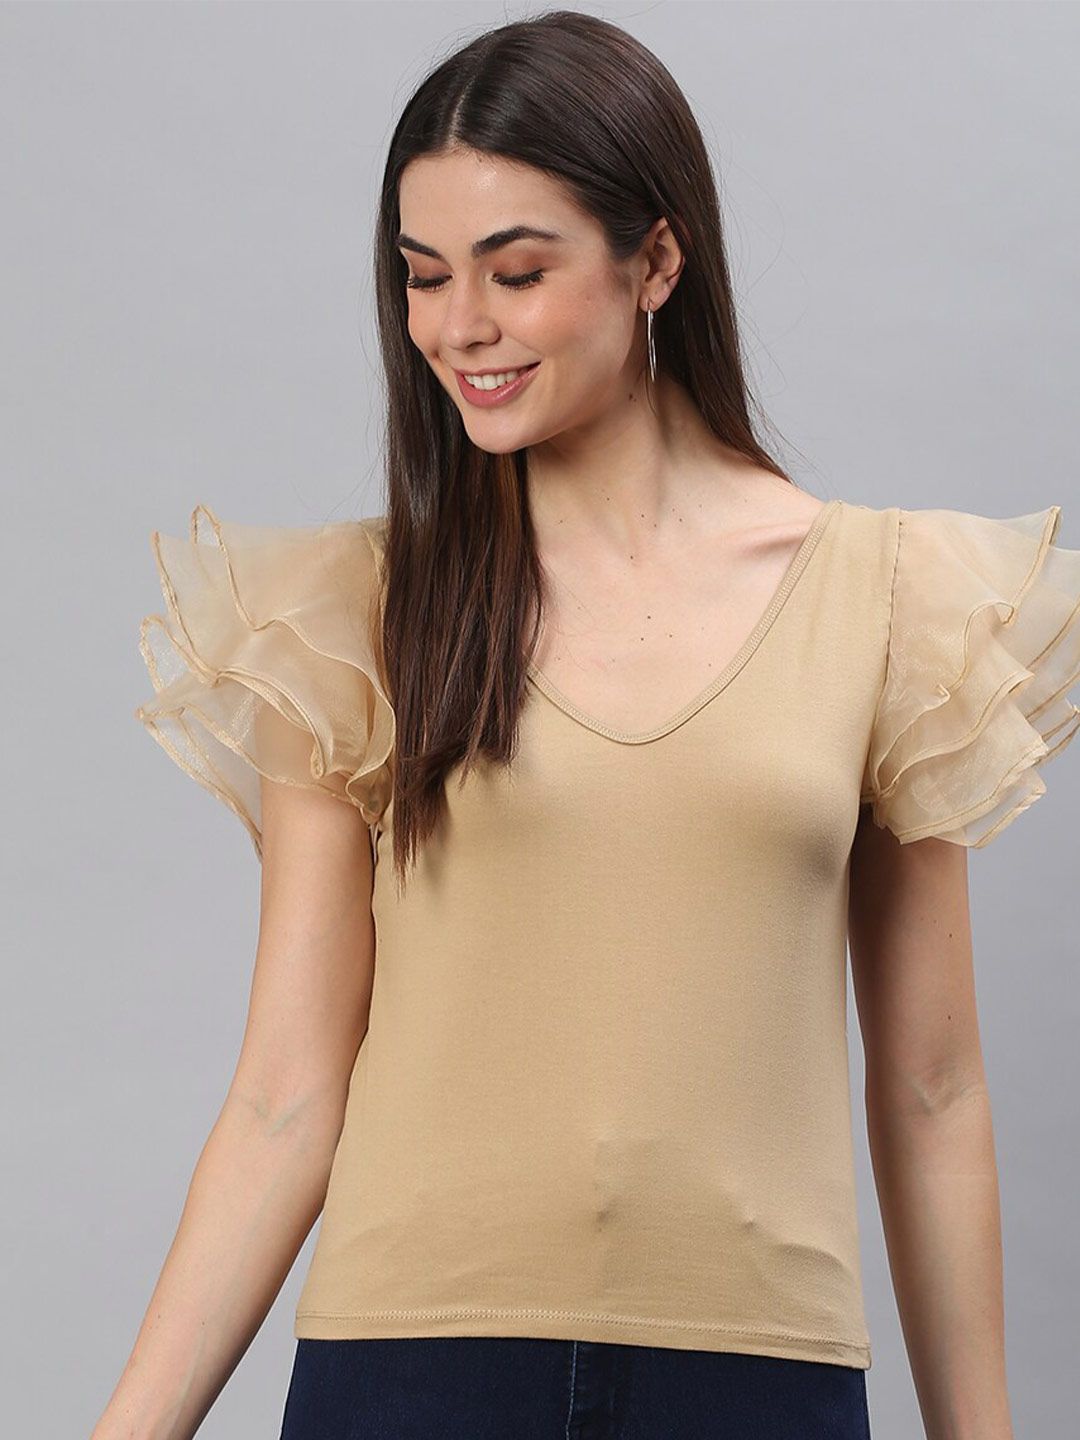 SCORPIUS Women Gold-Toned Solid Top Price in India